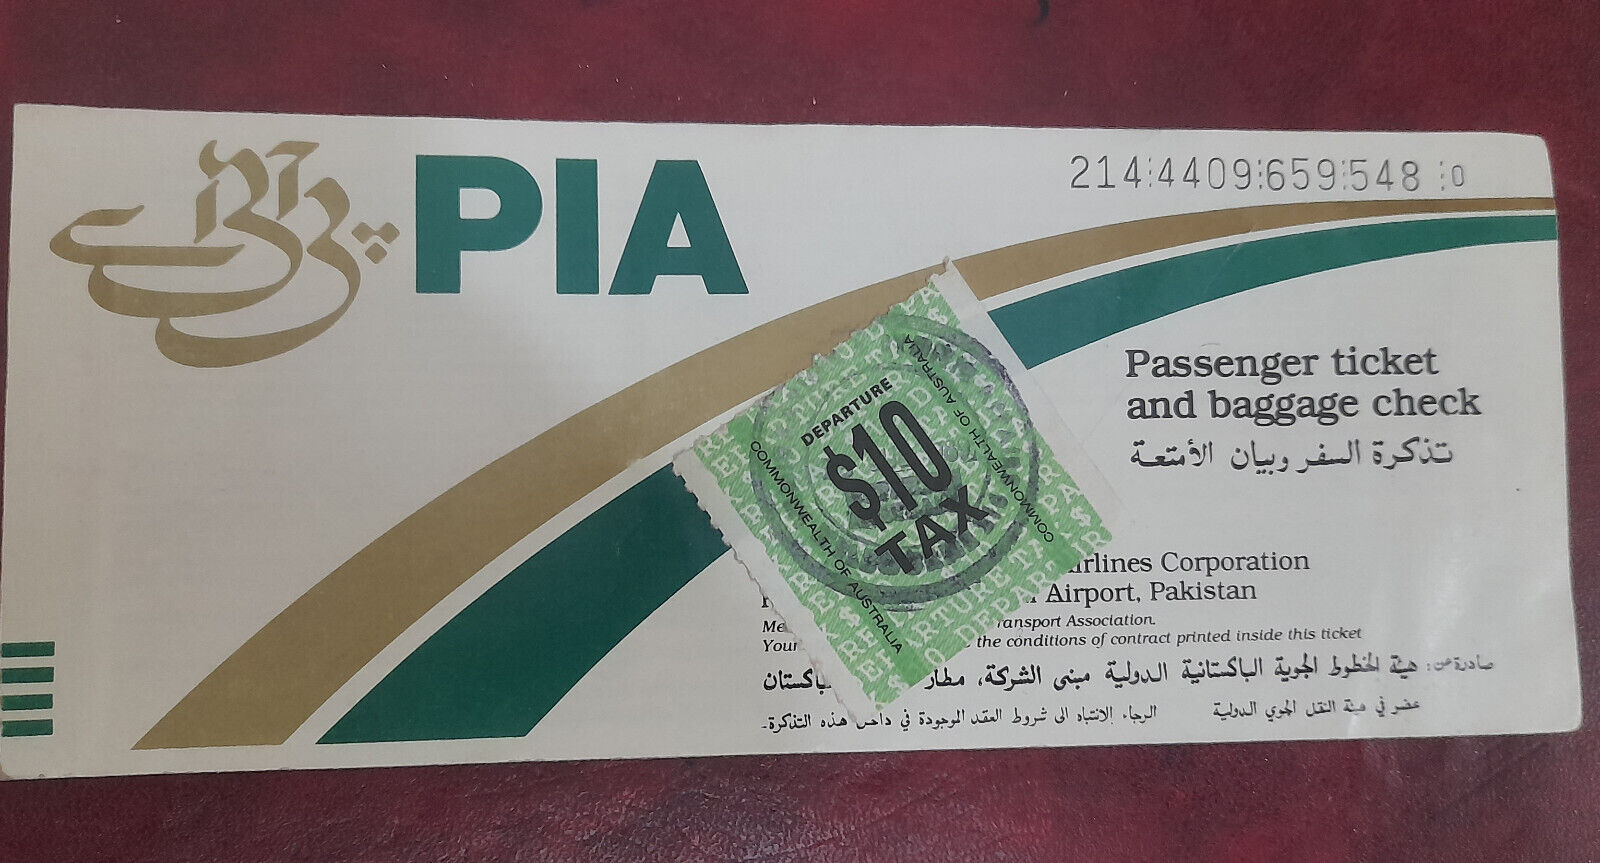 PIA AIRLINES PASSENGER TICKET WITH AUSTRALIA 10$ REVENUE TAX STAMP